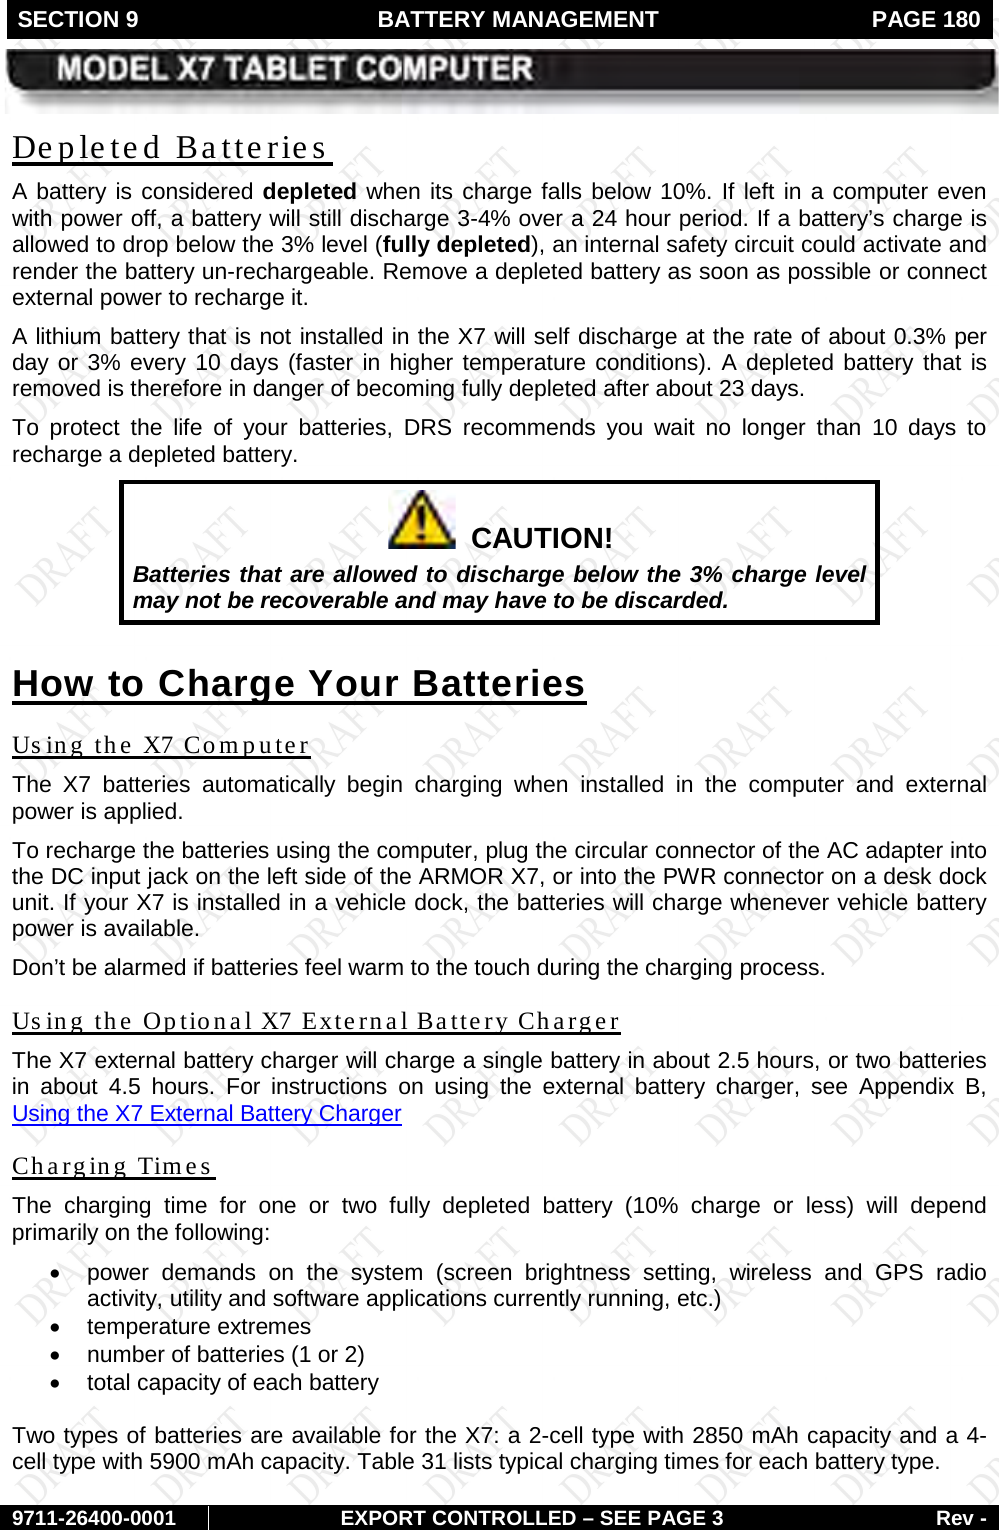 SECTION 9  BATTERY MANAGEMENT  PAGE 180        9711-26400-0001 EXPORT CONTROLLED – SEE PAGE 3 Rev - A battery is considered depleted when its charge falls below 10%. If left in a computer even with power off, a battery will still discharge 3-4% over a 24 hour period. If a battery’s charge is allowed to drop below the 3% level (fully depleted), an internal safety circuit could activate and render the battery un-rechargeable. Remove a depleted battery as soon as possible or connect external power to recharge it. Depleted Batteries A lithium battery that is not installed in the X7 will self discharge at the rate of about 0.3% per day or 3% every 10 days (faster in higher temperature conditions). A depleted battery that is removed is therefore in danger of becoming fully depleted after about 23 days.  To protect the life of your batteries, DRS recommends you wait no longer than 10 days to recharge a depleted battery.   CAUTION! Batteries that are allowed to discharge below the 3% charge level may not be recoverable and may have to be discarded. How to Charge Your Batteries The  X7 batteries automatically begin charging when installed in the computer and  external power is applied.  Using the X7 Computer To recharge the batteries using the computer, plug the circular connector of the AC adapter into the DC input jack on the left side of the ARMOR X7, or into the PWR connector on a desk dock unit. If your X7 is installed in a vehicle dock, the batteries will charge whenever vehicle battery power is available.  Don’t be alarmed if batteries feel warm to the touch during the charging process. The X7 external battery charger will charge a single battery in about 2.5 hours, or two batteries in about 4.5 hours. For instructions on using the external battery charger, see Appendix B, Using the Optional X7 External Battery Charger Using the X7 External Battery Charger  The  charging time for one or two fully  depleted battery (10% charge or less) will depend primarily on the following: Charging Times  • power demands on the system (screen brightness setting, wireless and GPS radio activity, utility and software applications currently running, etc.) • temperature extremes • number of batteries (1 or 2) • total capacity of each battery  Two types of batteries are available for the X7: a 2-cell type with 2850 mAh capacity and a 4-cell type with 5900 mAh capacity. Table 31 lists typical charging times for each battery type. 